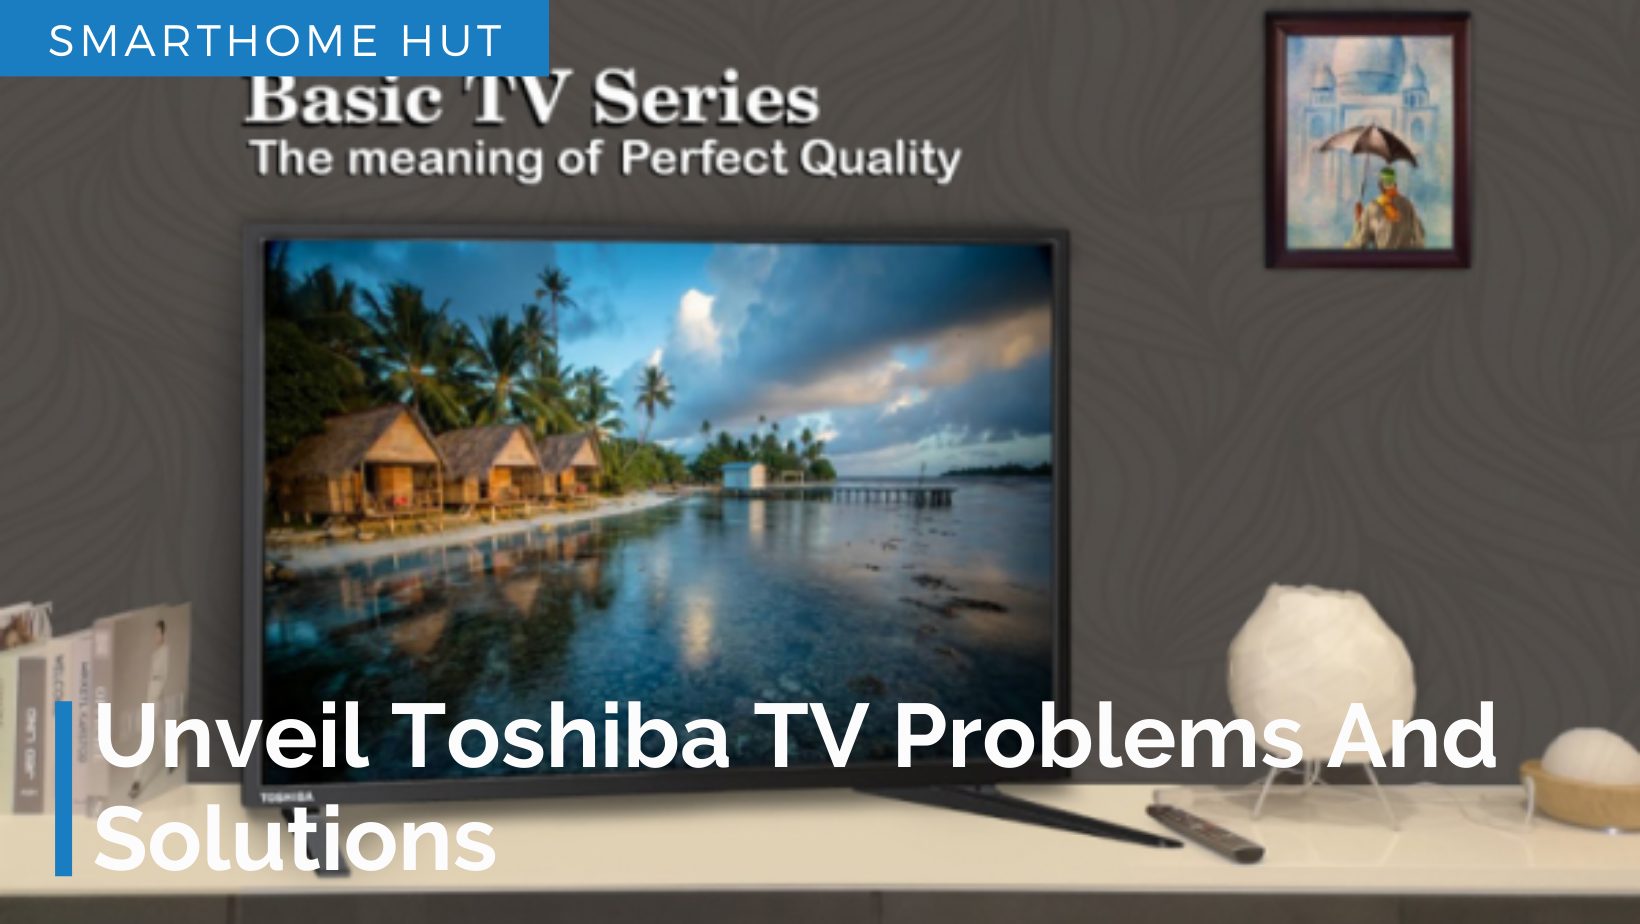 Toshiba TV Problems And Solutions